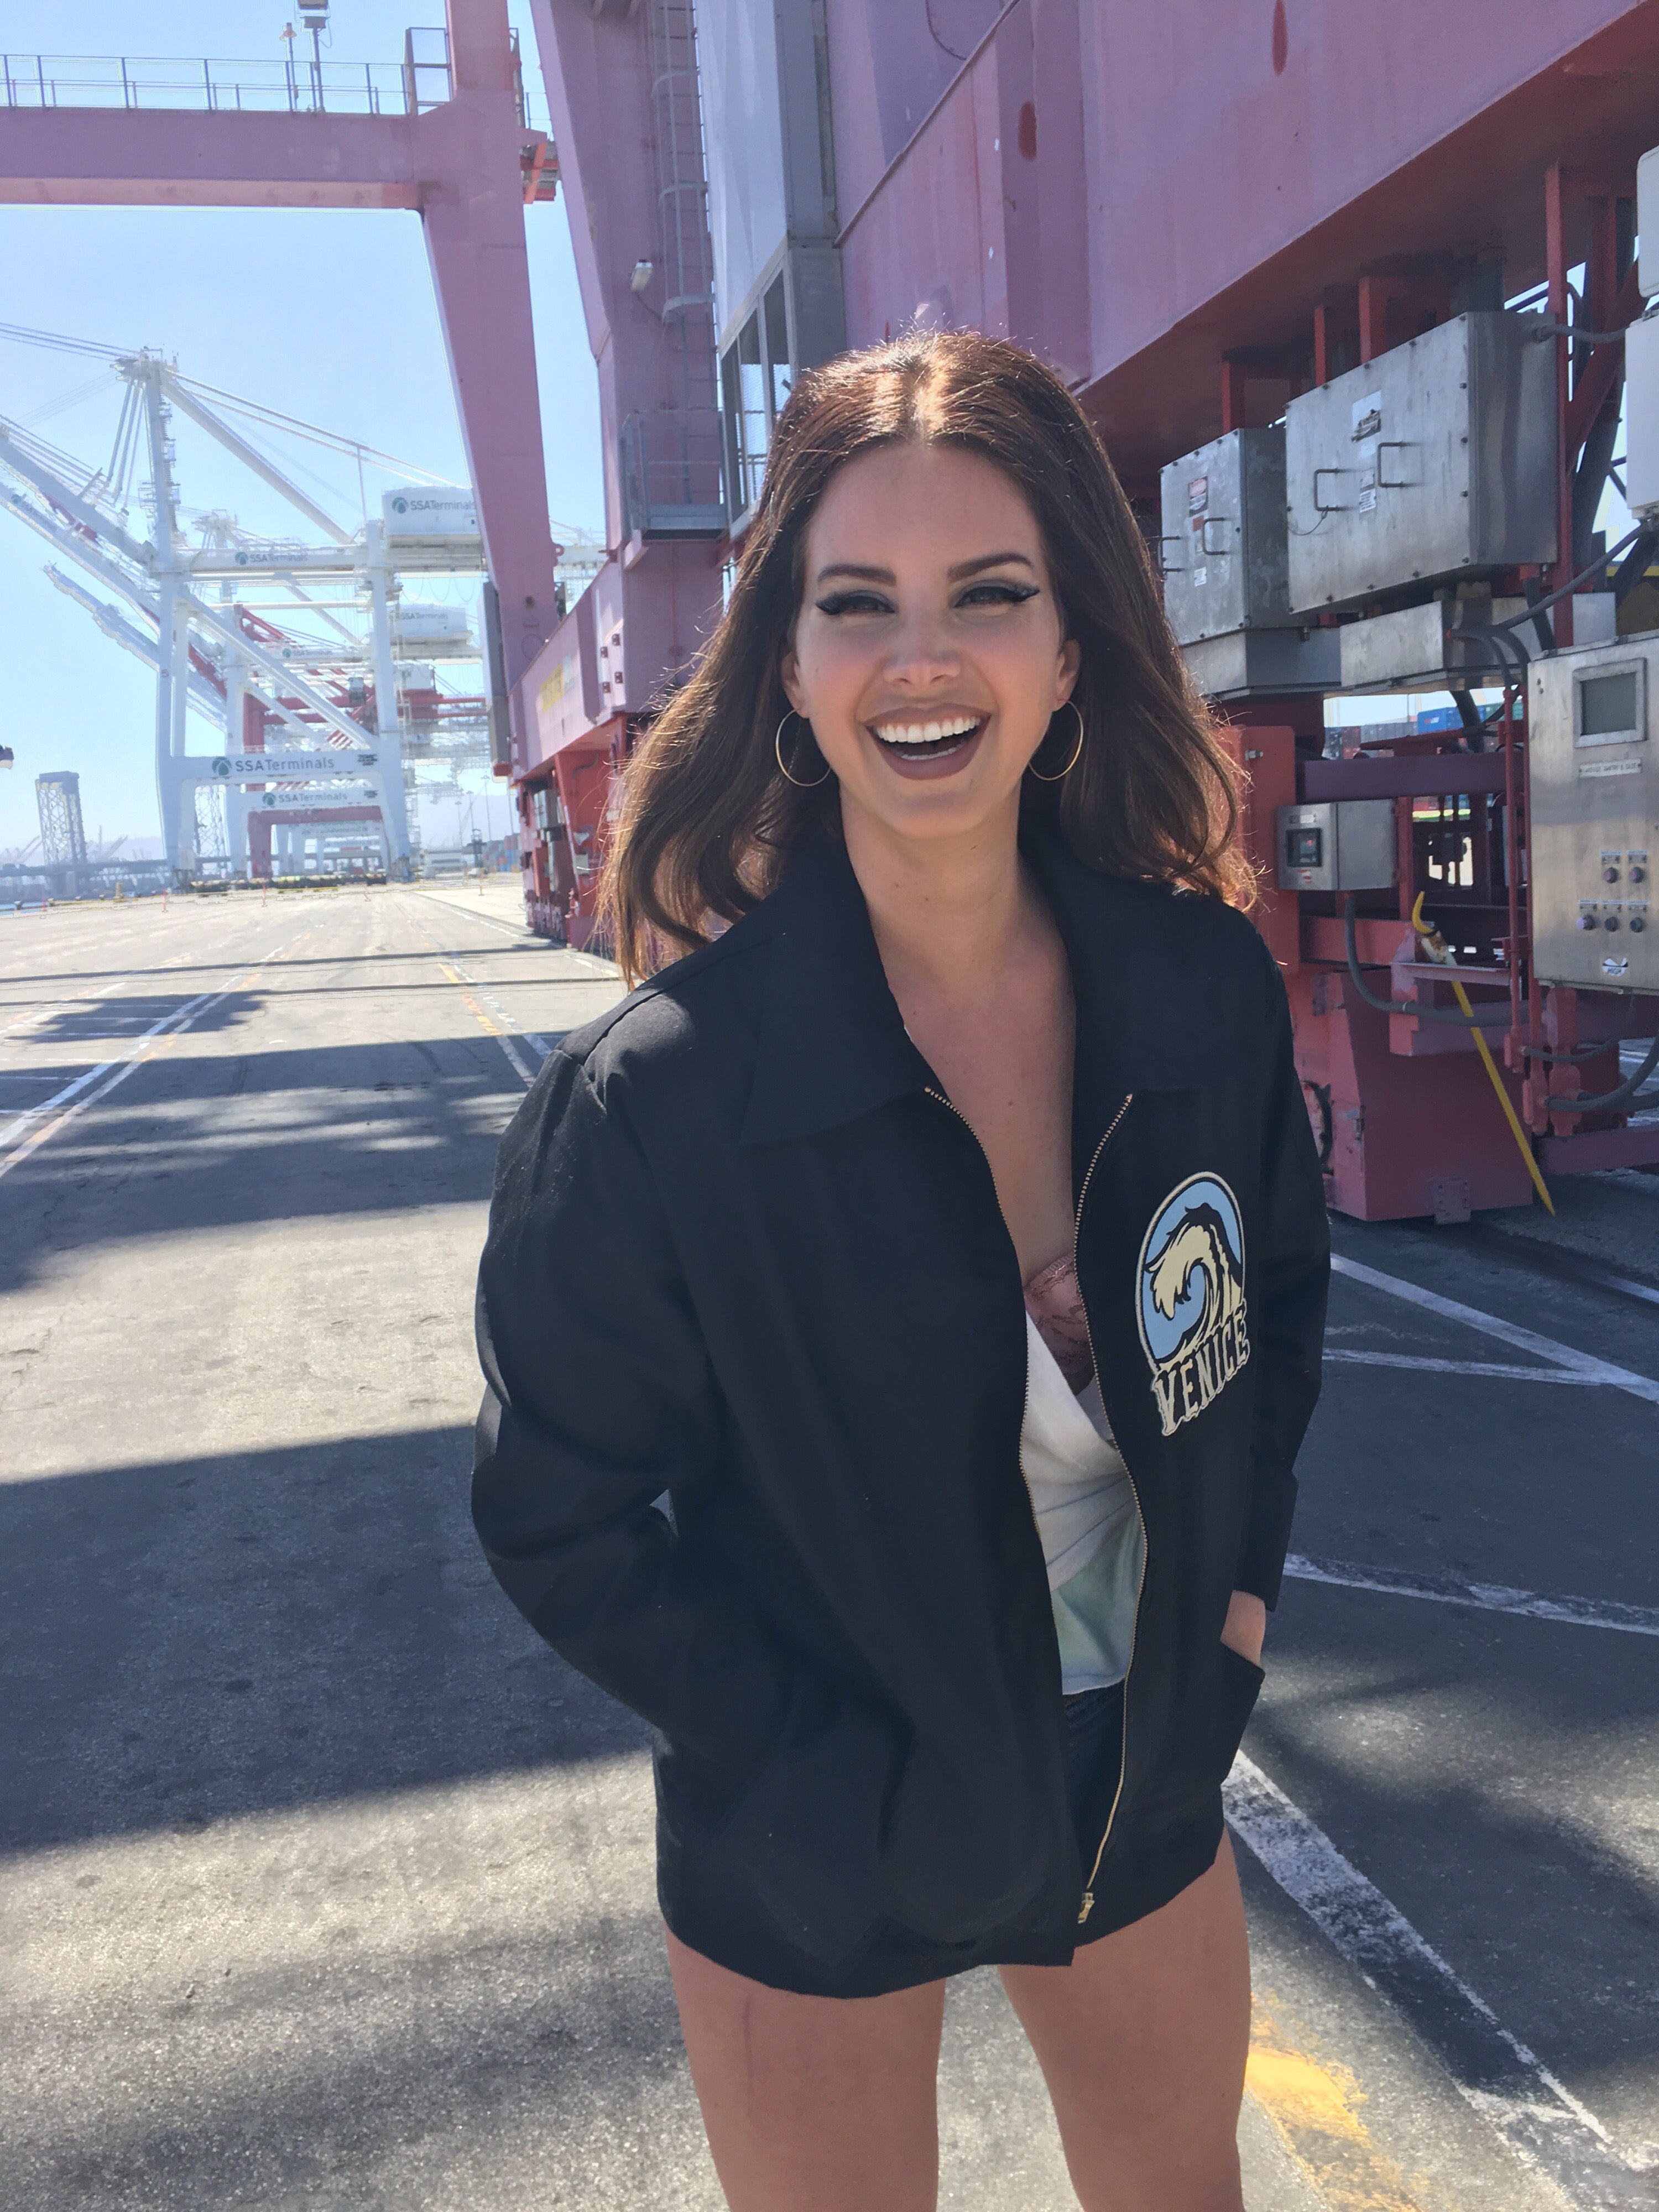 Lana Del Rey - One Special Night, One Special Show - Platinum Tickets in Boston promo photo for Official Platinum presale offer code